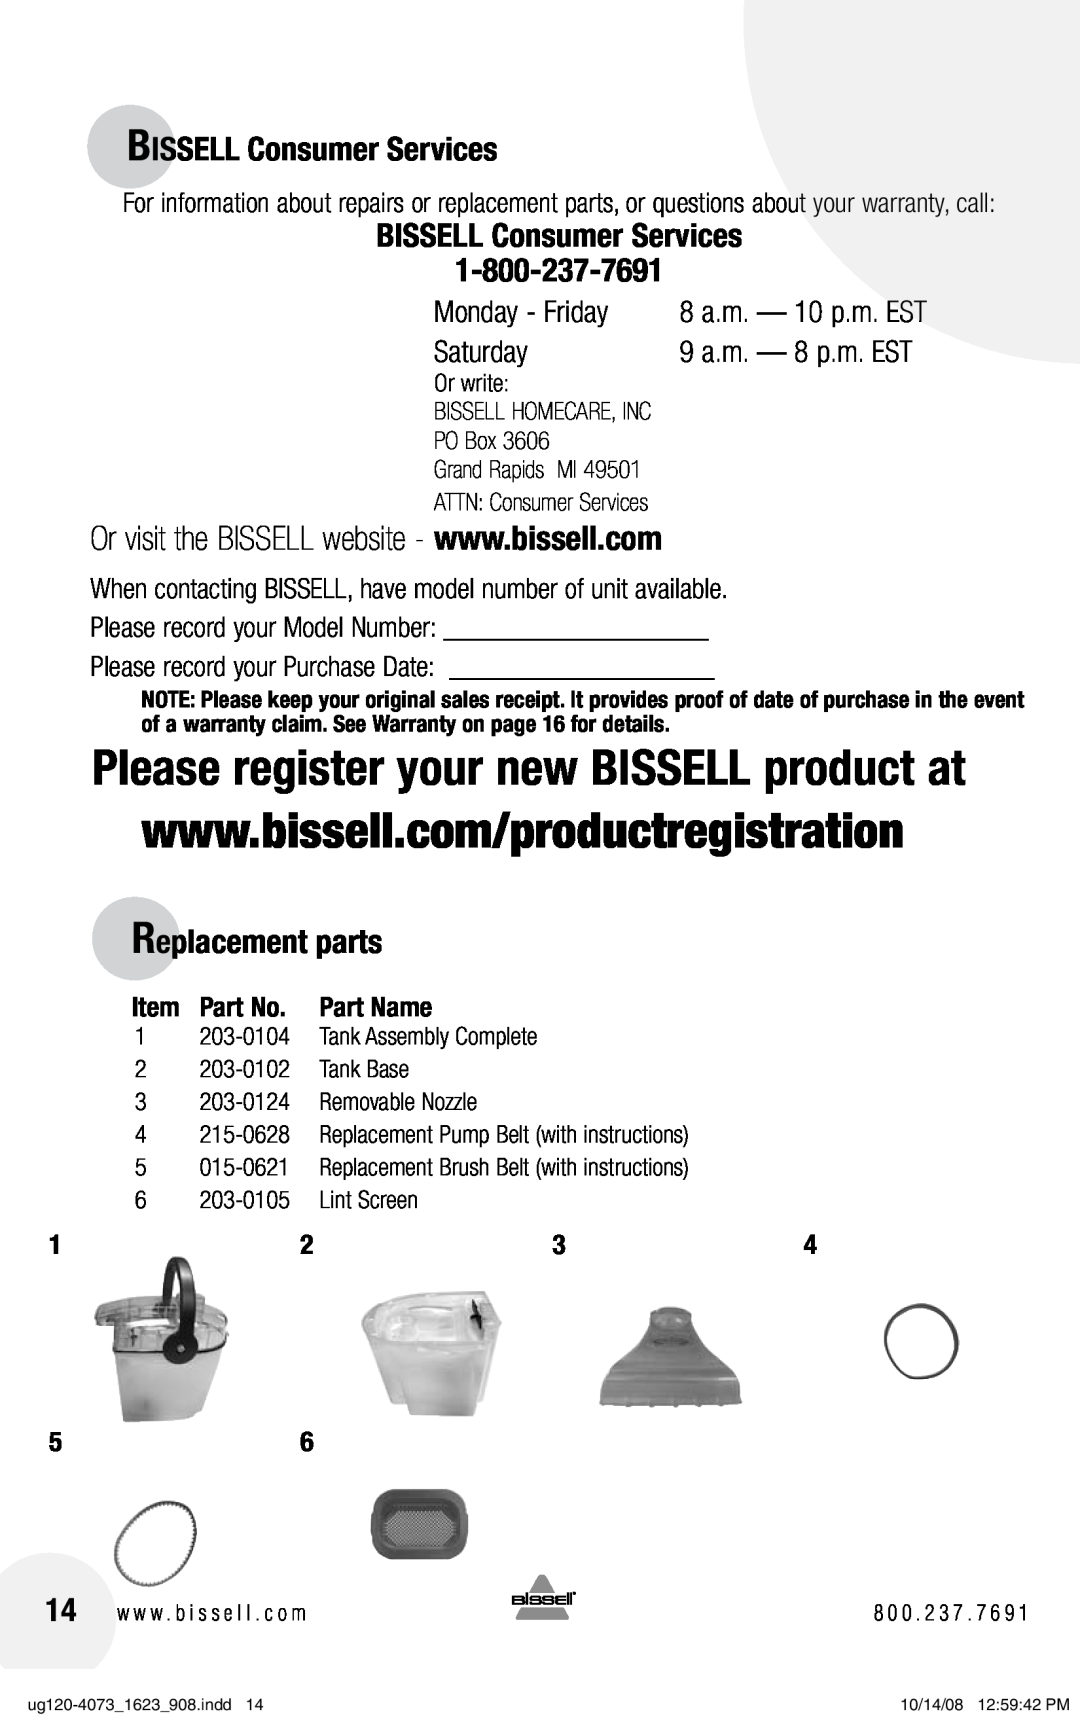 Bissell 1623 warranty BISSELL Consumer Services, Replacement parts, Part Name, Monday - Friday, Saturday, 203-0105 